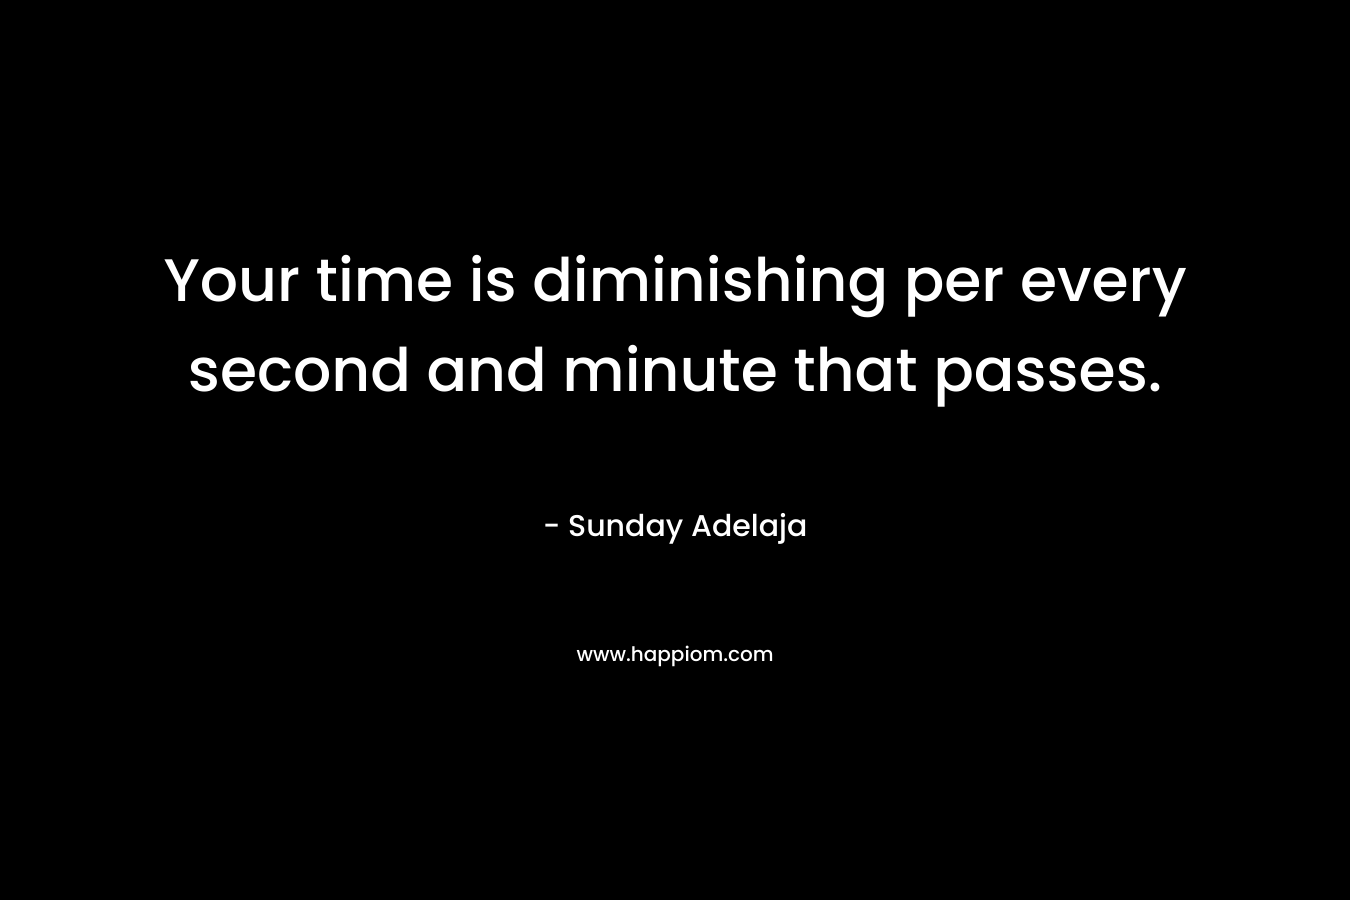 Your time is diminishing per every second and minute that passes.